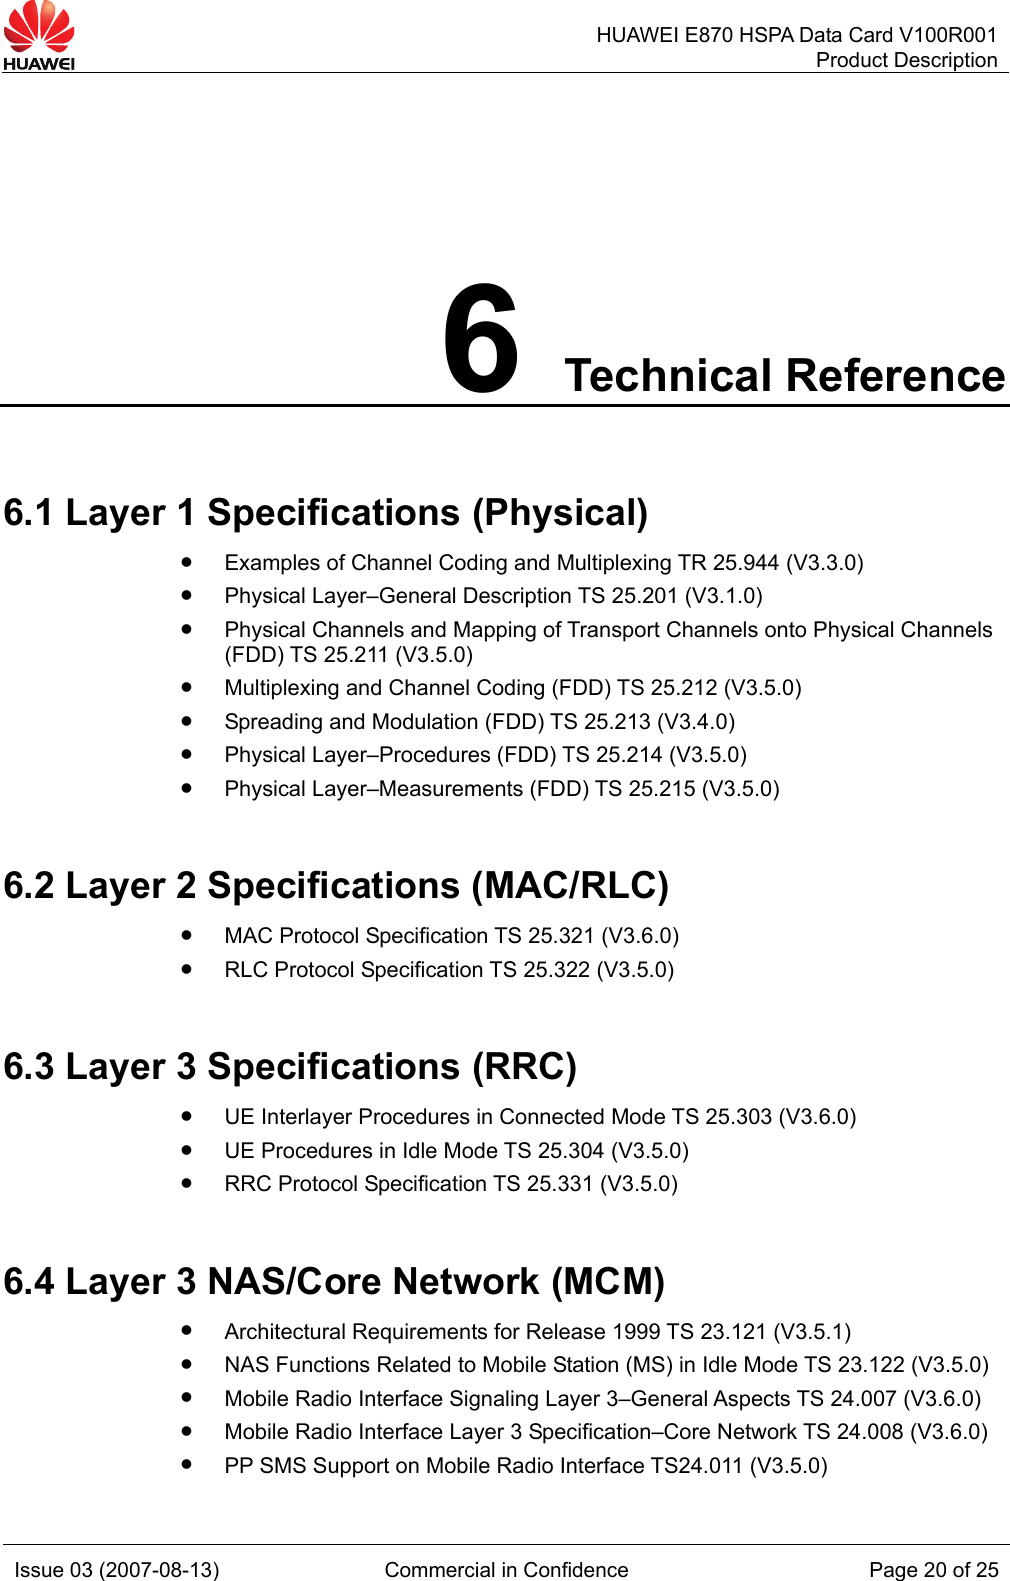   HUAWEI E870 HSPA Data Card V100R001Product Description Issue 03 (2007-08-13)  Commercial in Confidence  Page 20 of 25 6 Technical Reference 6.1 Layer 1 Specifications (Physical) z Examples of Channel Coding and Multiplexing TR 25.944 (V3.3.0) z Physical Layer–General Description TS 25.201 (V3.1.0) z Physical Channels and Mapping of Transport Channels onto Physical Channels (FDD) TS 25.211 (V3.5.0) z Multiplexing and Channel Coding (FDD) TS 25.212 (V3.5.0) z Spreading and Modulation (FDD) TS 25.213 (V3.4.0) z Physical Layer–Procedures (FDD) TS 25.214 (V3.5.0) z Physical Layer–Measurements (FDD) TS 25.215 (V3.5.0) 6.2 Layer 2 Specifications (MAC/RLC) z MAC Protocol Specification TS 25.321 (V3.6.0) z RLC Protocol Specification TS 25.322 (V3.5.0) 6.3 Layer 3 Specifications (RRC) z UE Interlayer Procedures in Connected Mode TS 25.303 (V3.6.0) z UE Procedures in Idle Mode TS 25.304 (V3.5.0) z RRC Protocol Specification TS 25.331 (V3.5.0) 6.4 Layer 3 NAS/Core Network (MCM) z Architectural Requirements for Release 1999 TS 23.121 (V3.5.1) z NAS Functions Related to Mobile Station (MS) in Idle Mode TS 23.122 (V3.5.0) z Mobile Radio Interface Signaling Layer 3–General Aspects TS 24.007 (V3.6.0) z Mobile Radio Interface Layer 3 Specification–Core Network TS 24.008 (V3.6.0) z PP SMS Support on Mobile Radio Interface TS24.011 (V3.5.0) 